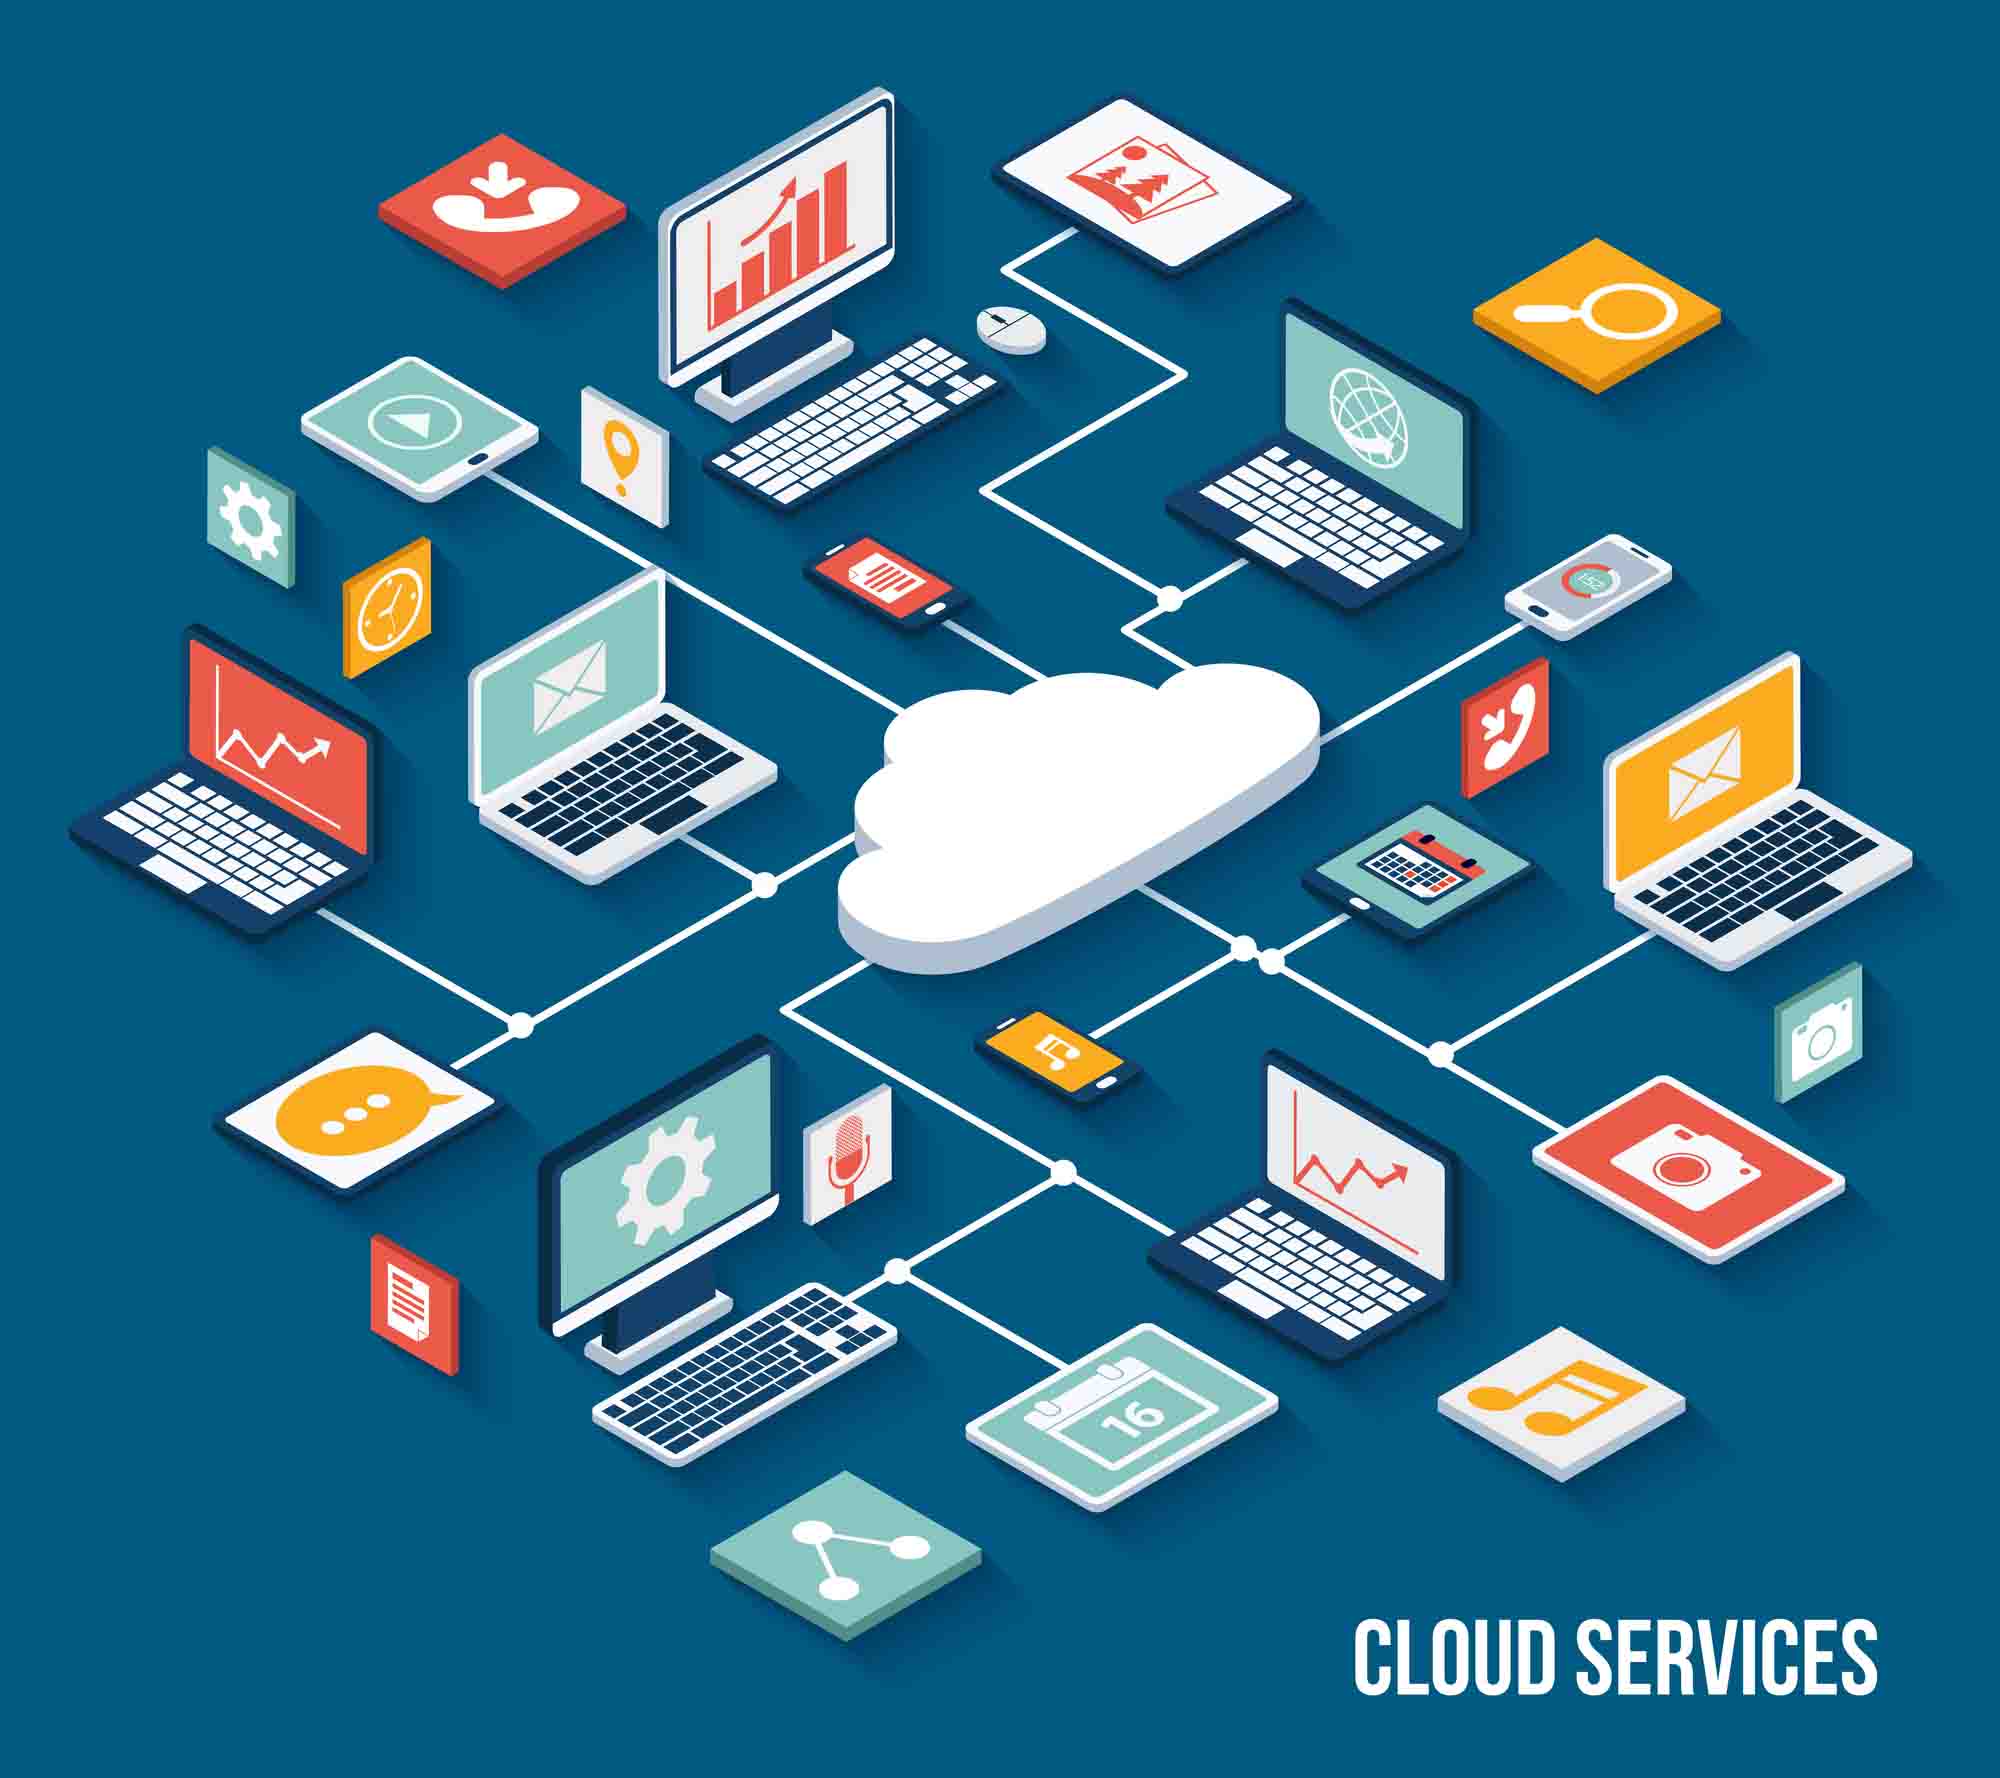 Fully Managed IT Cloud Services